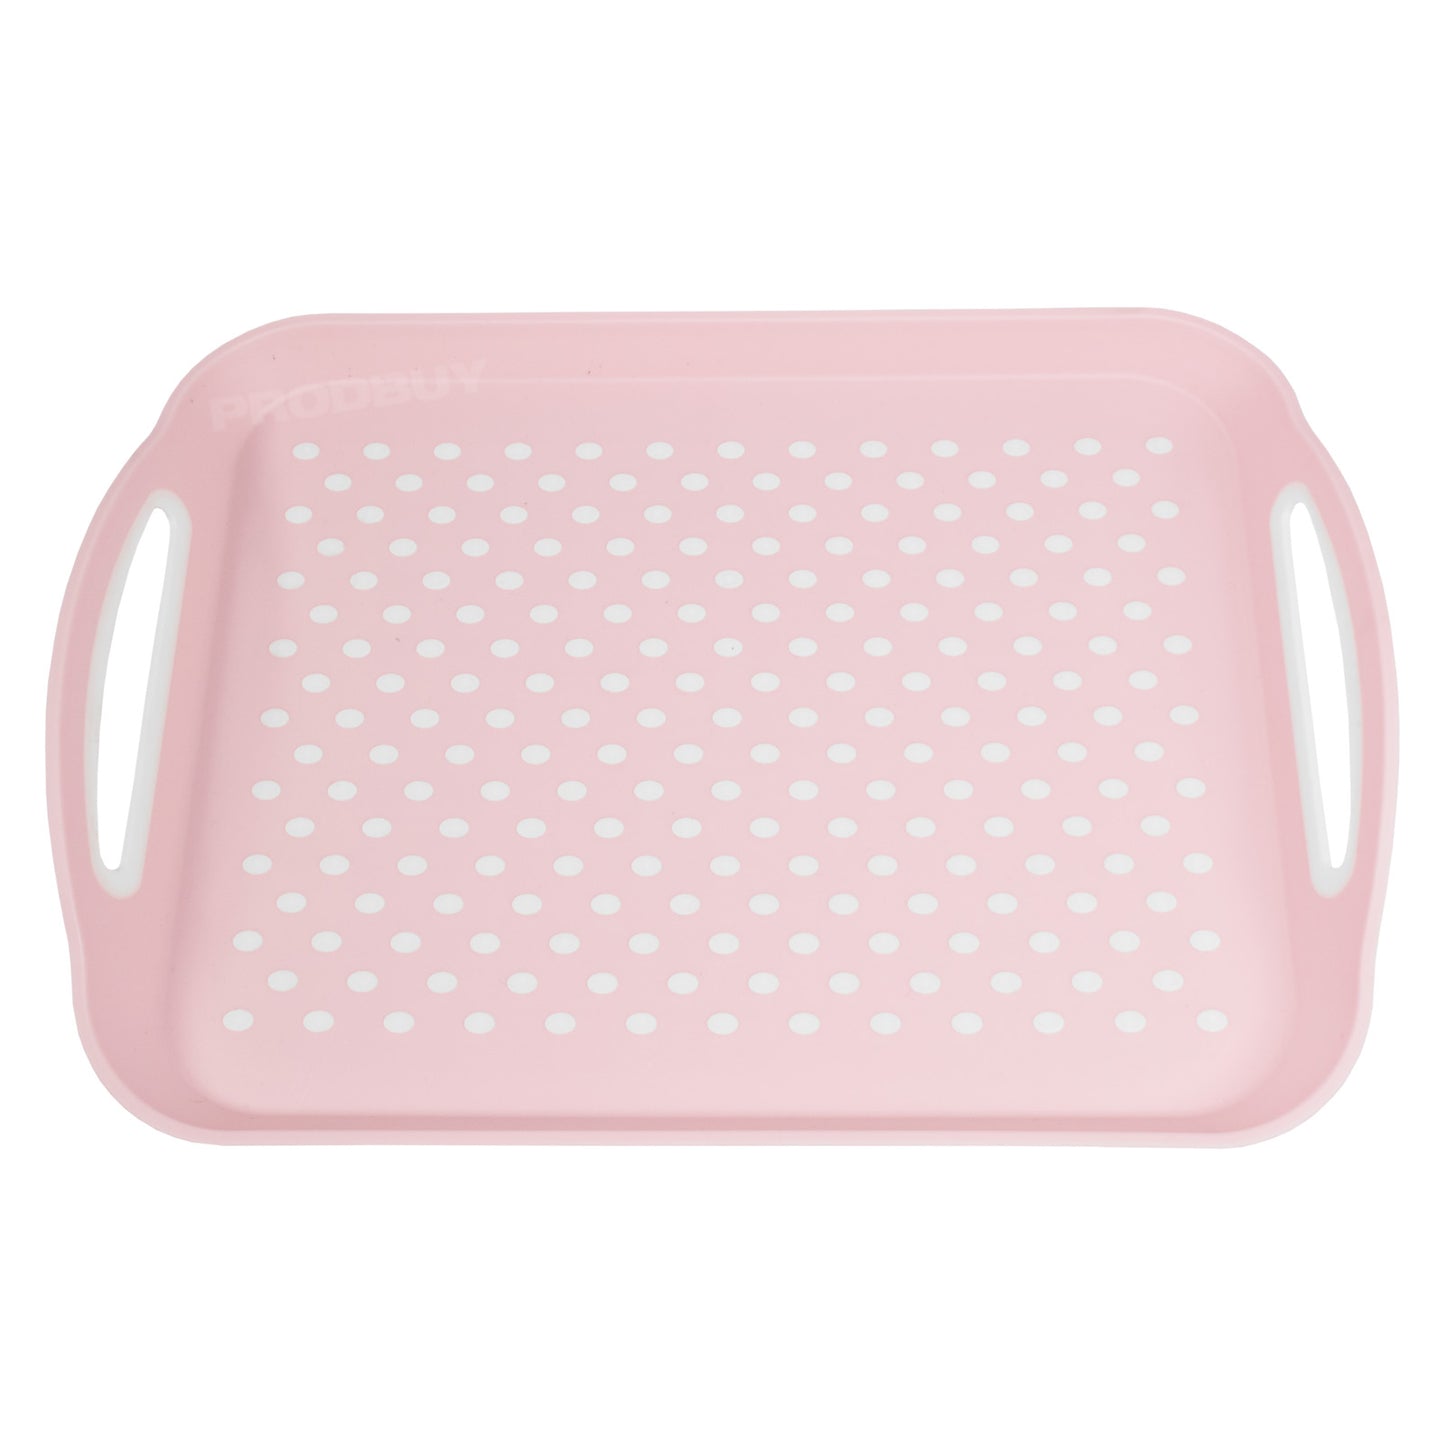 Large 39cm Non-Slip Serving Tray with Handles